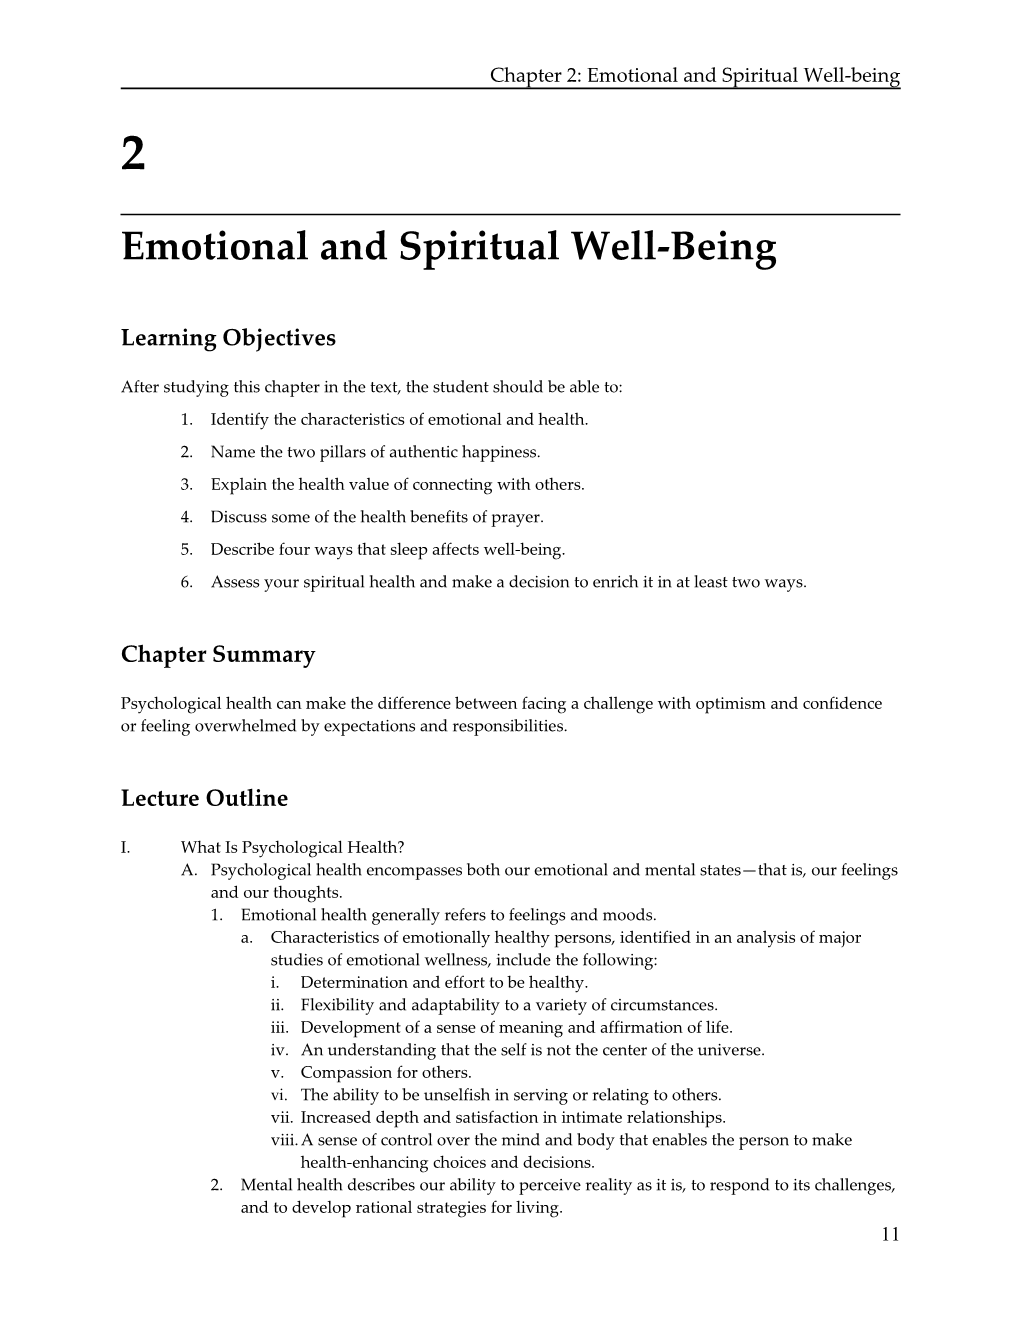 Chapter 2: Emotional and Spiritual Well-Being